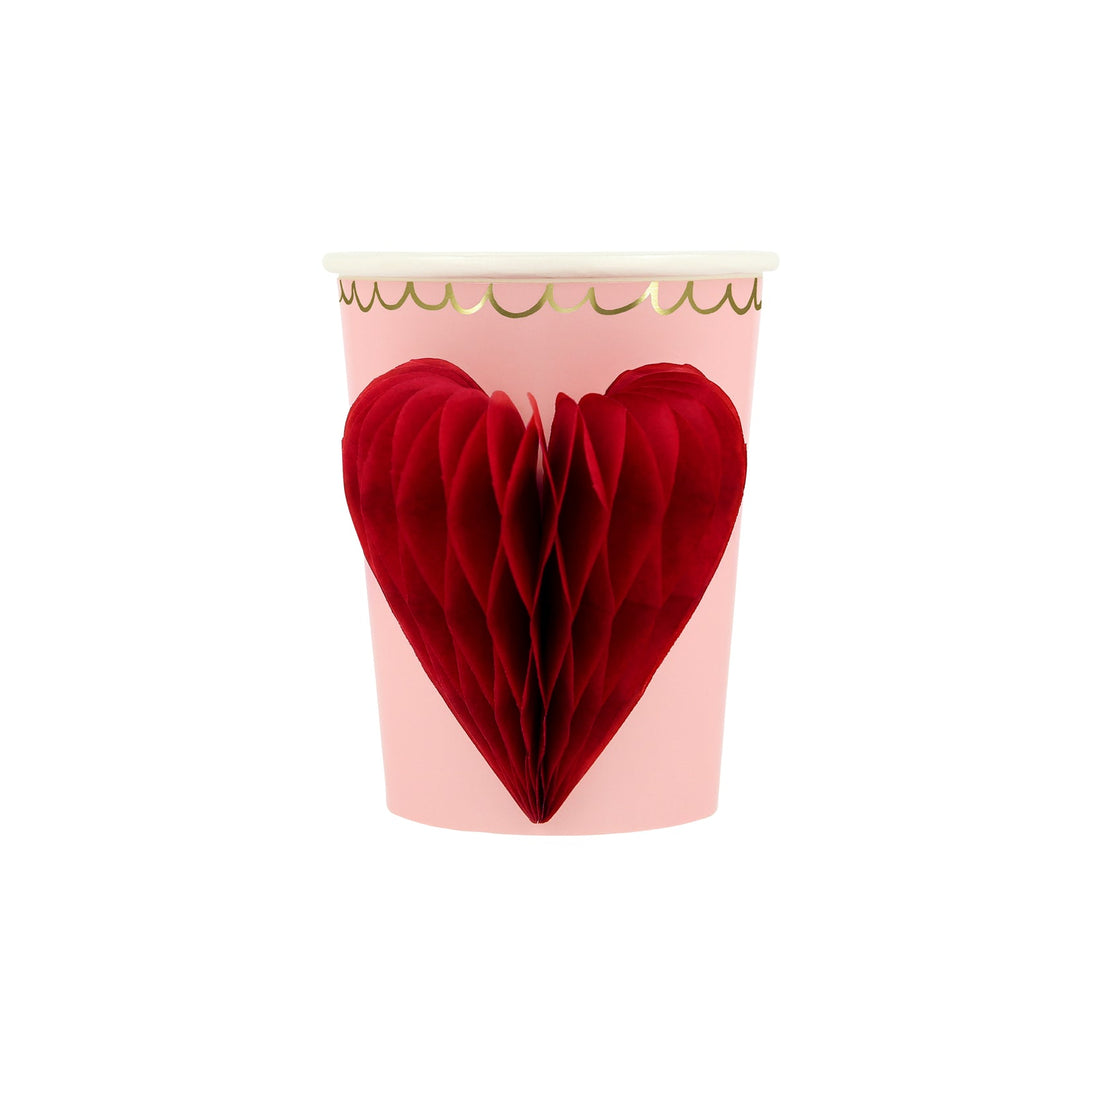 A vintage pink paper cup with a Honeycomb Heart Cup from Meri Meri on it.